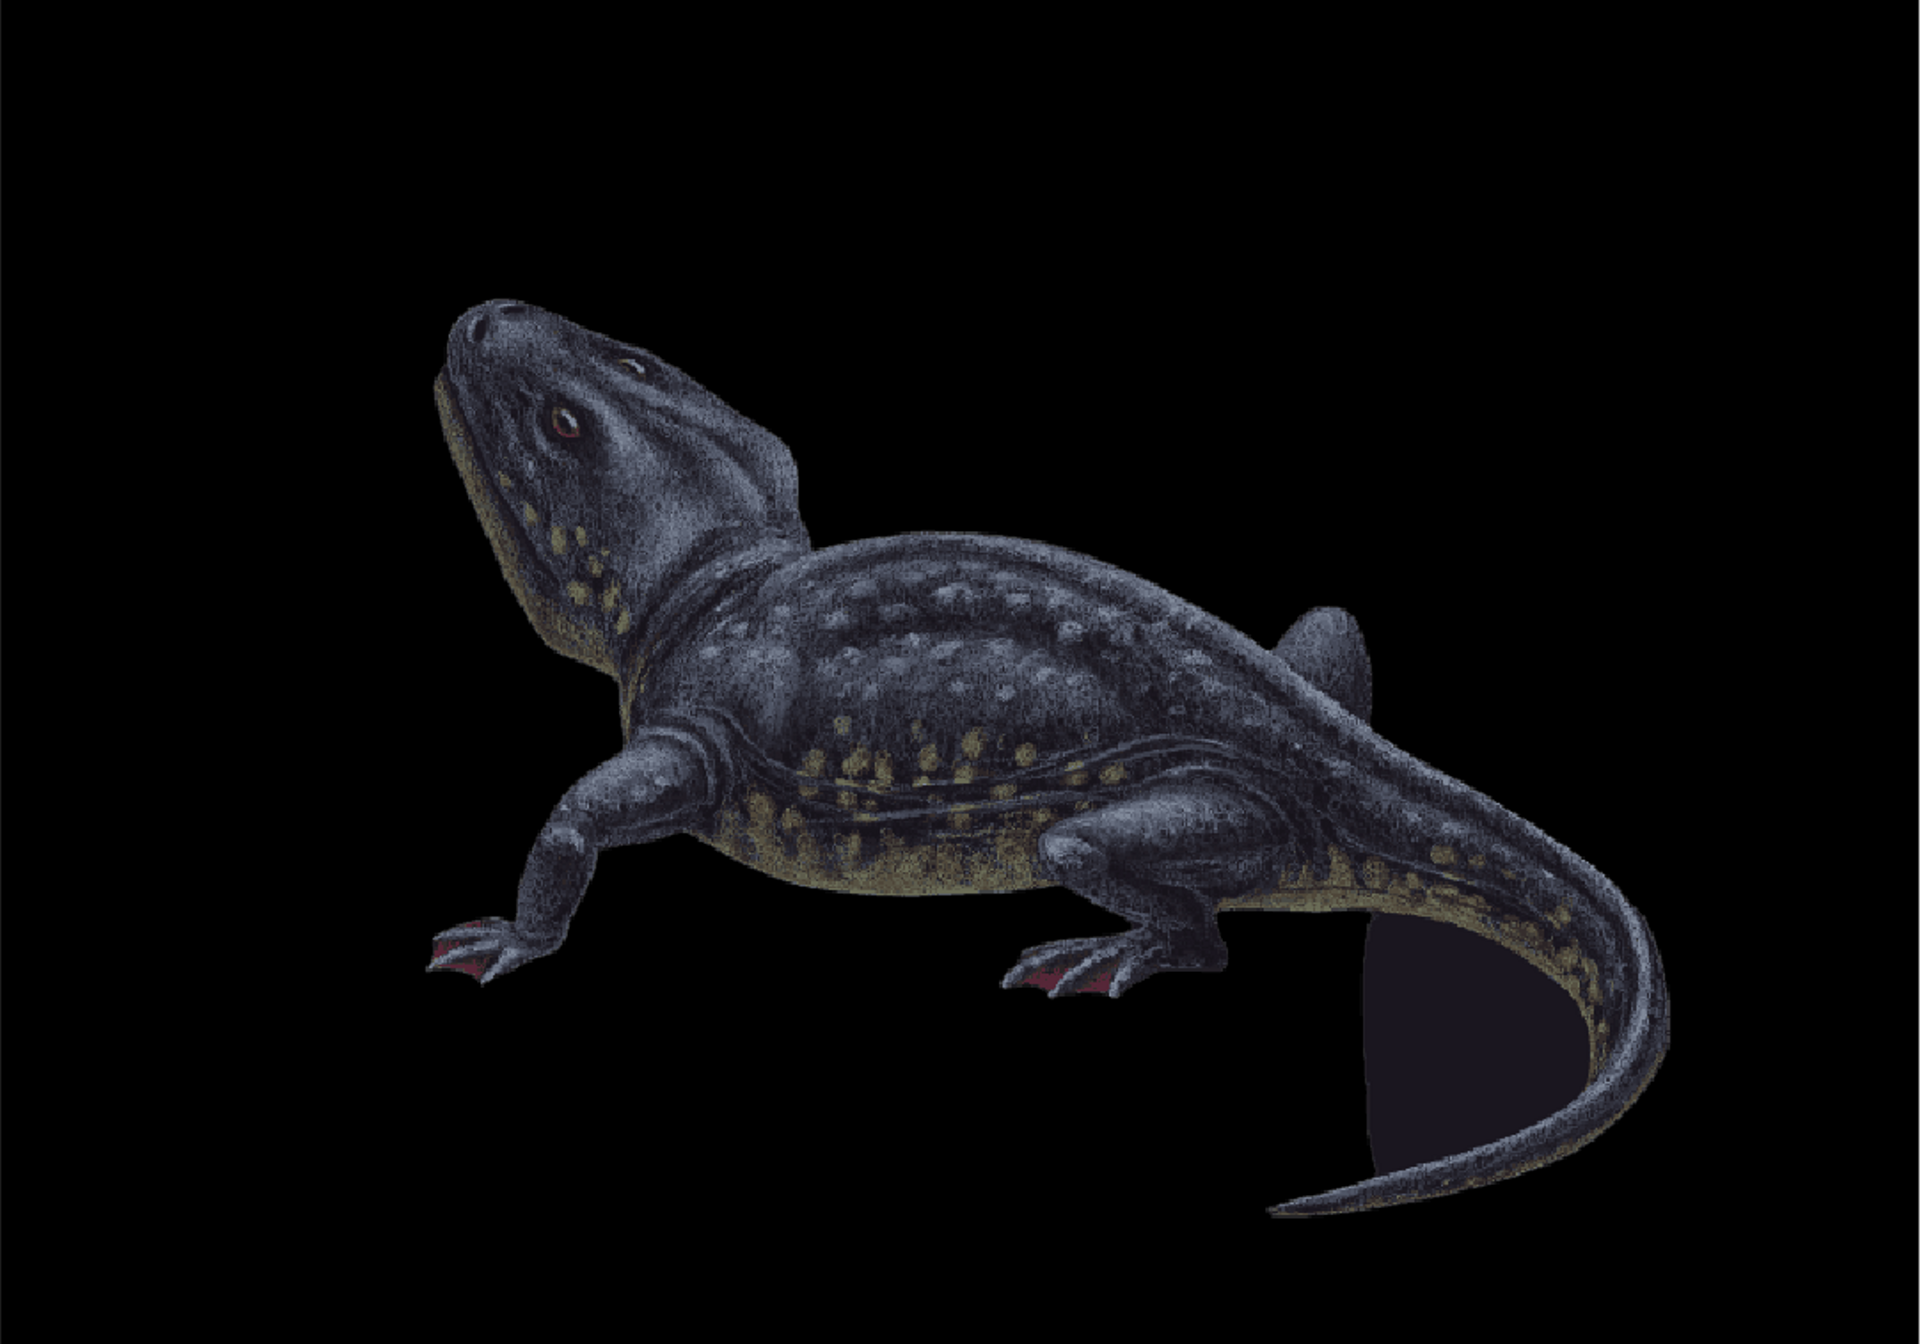 Here is an illustration of how a Sclerocephaulus is believed to have looked like.